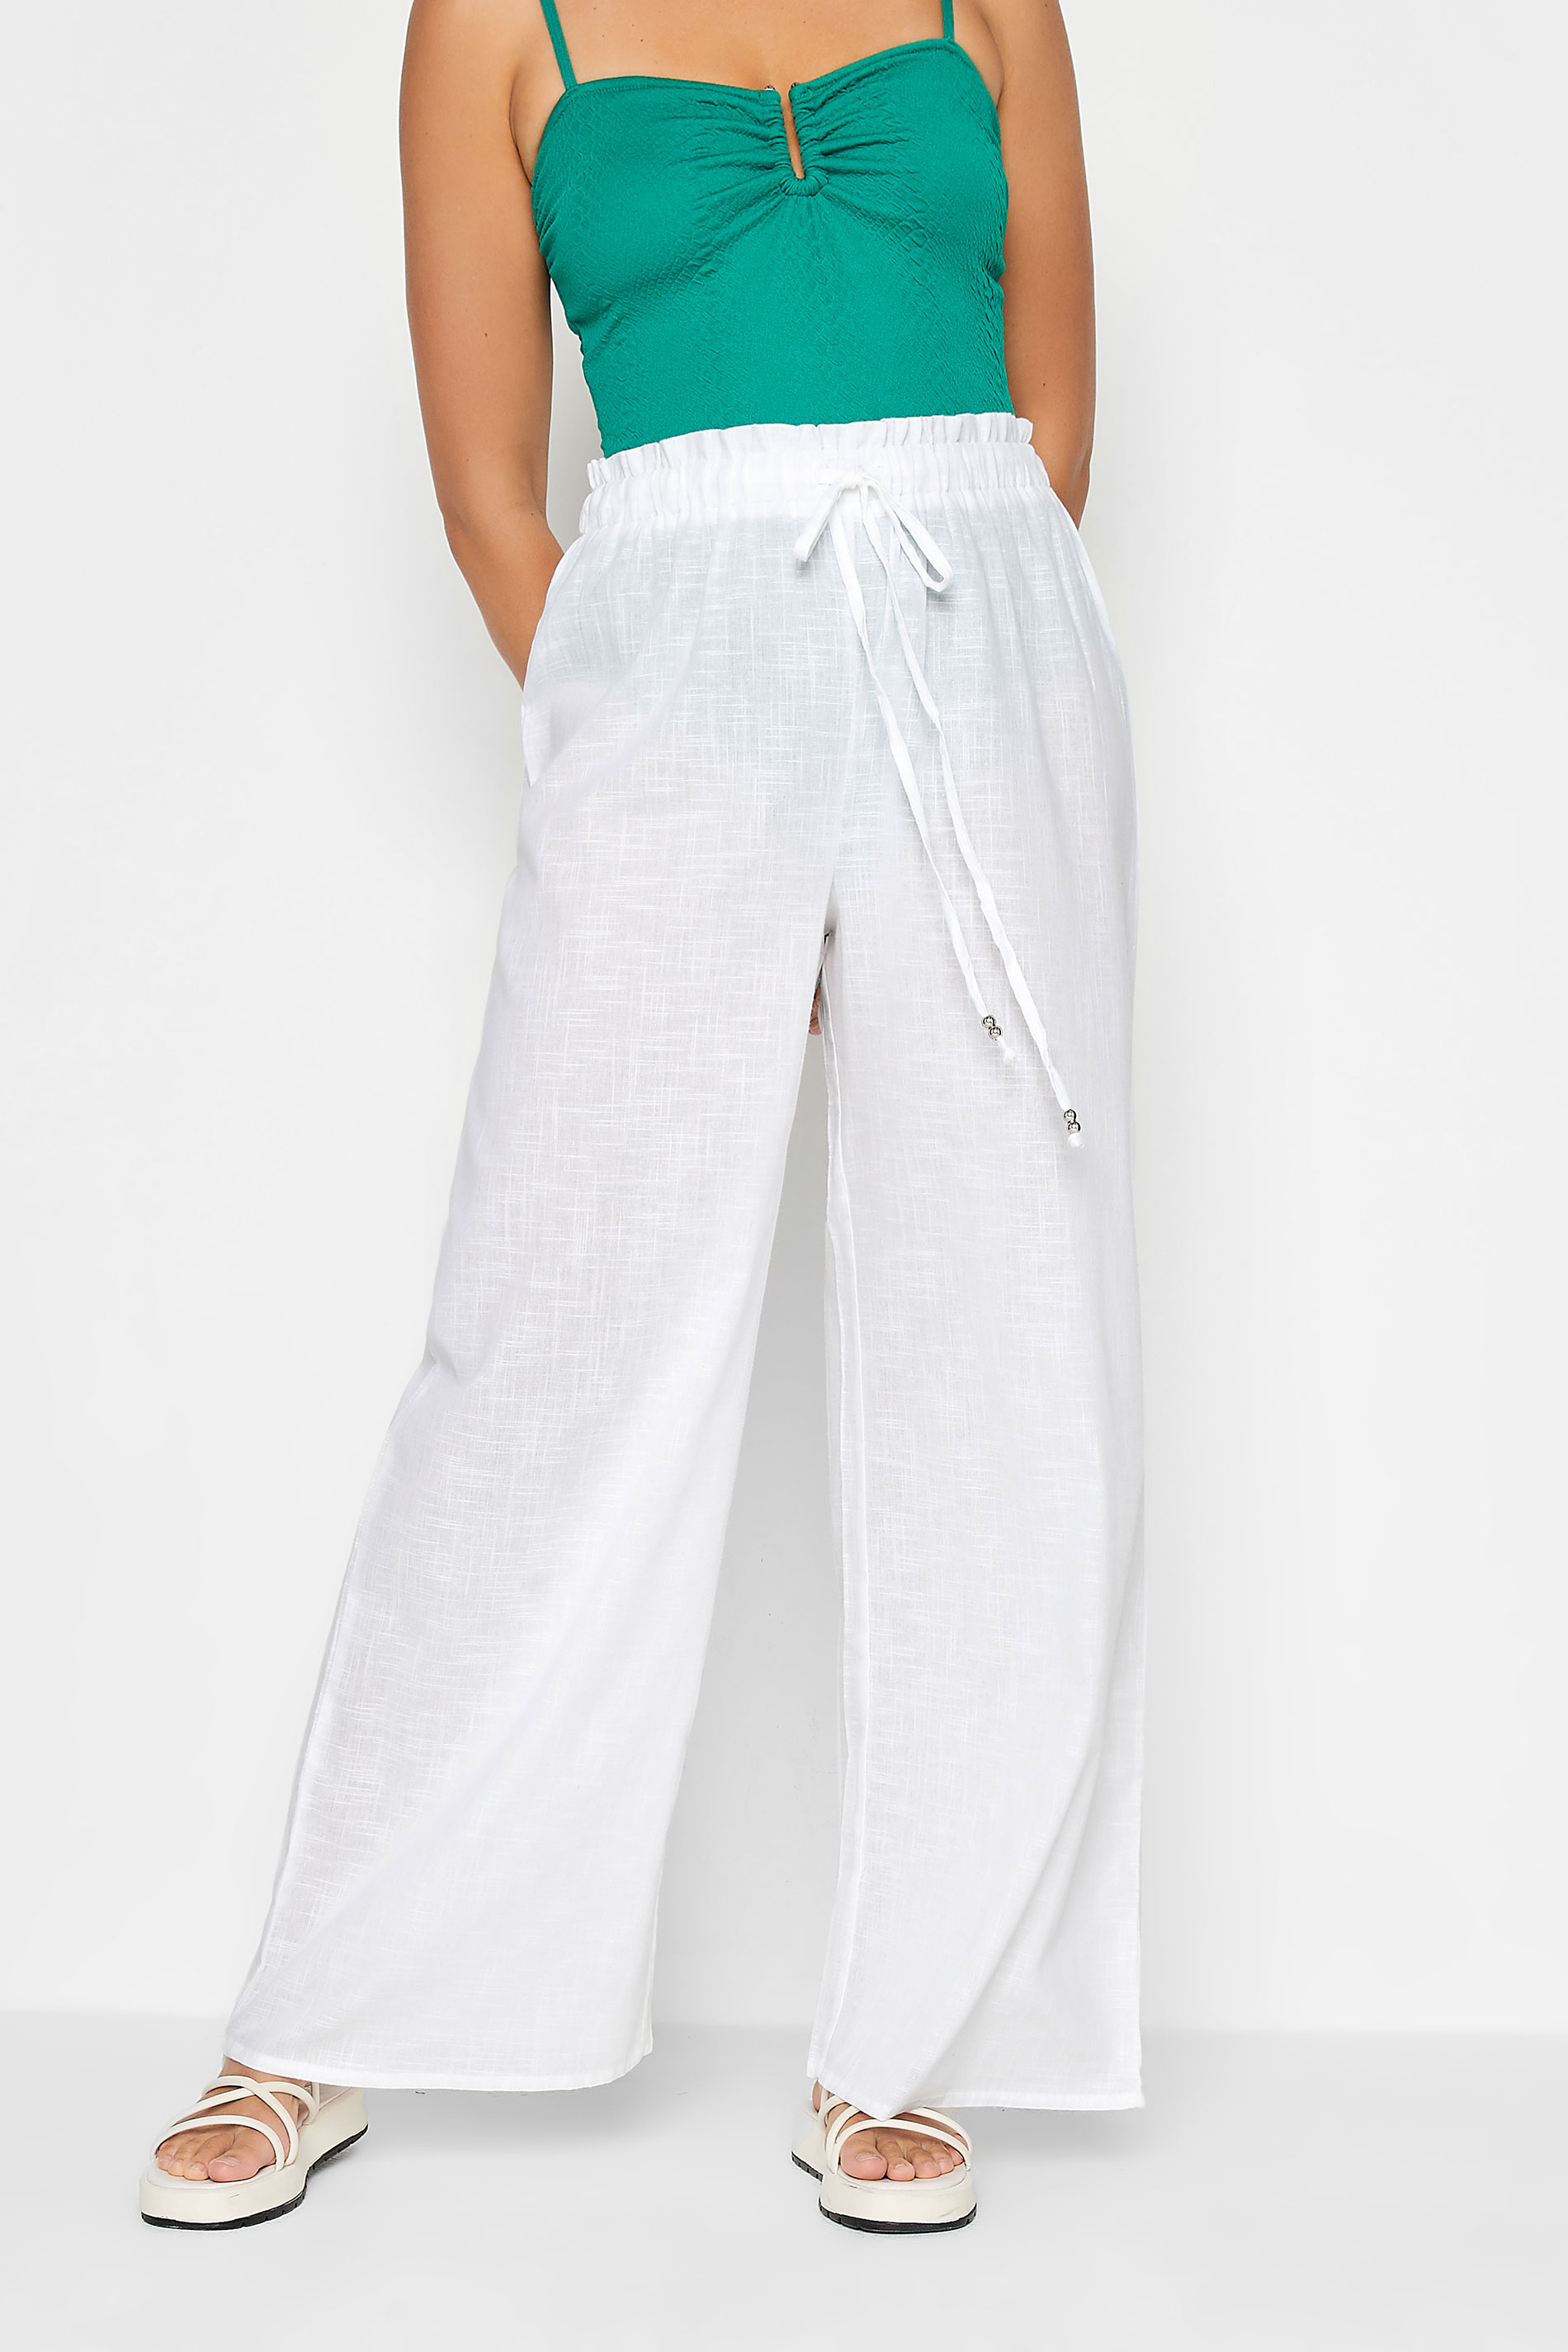 COLLUSION low rise linen beach trouser in black  ASOS